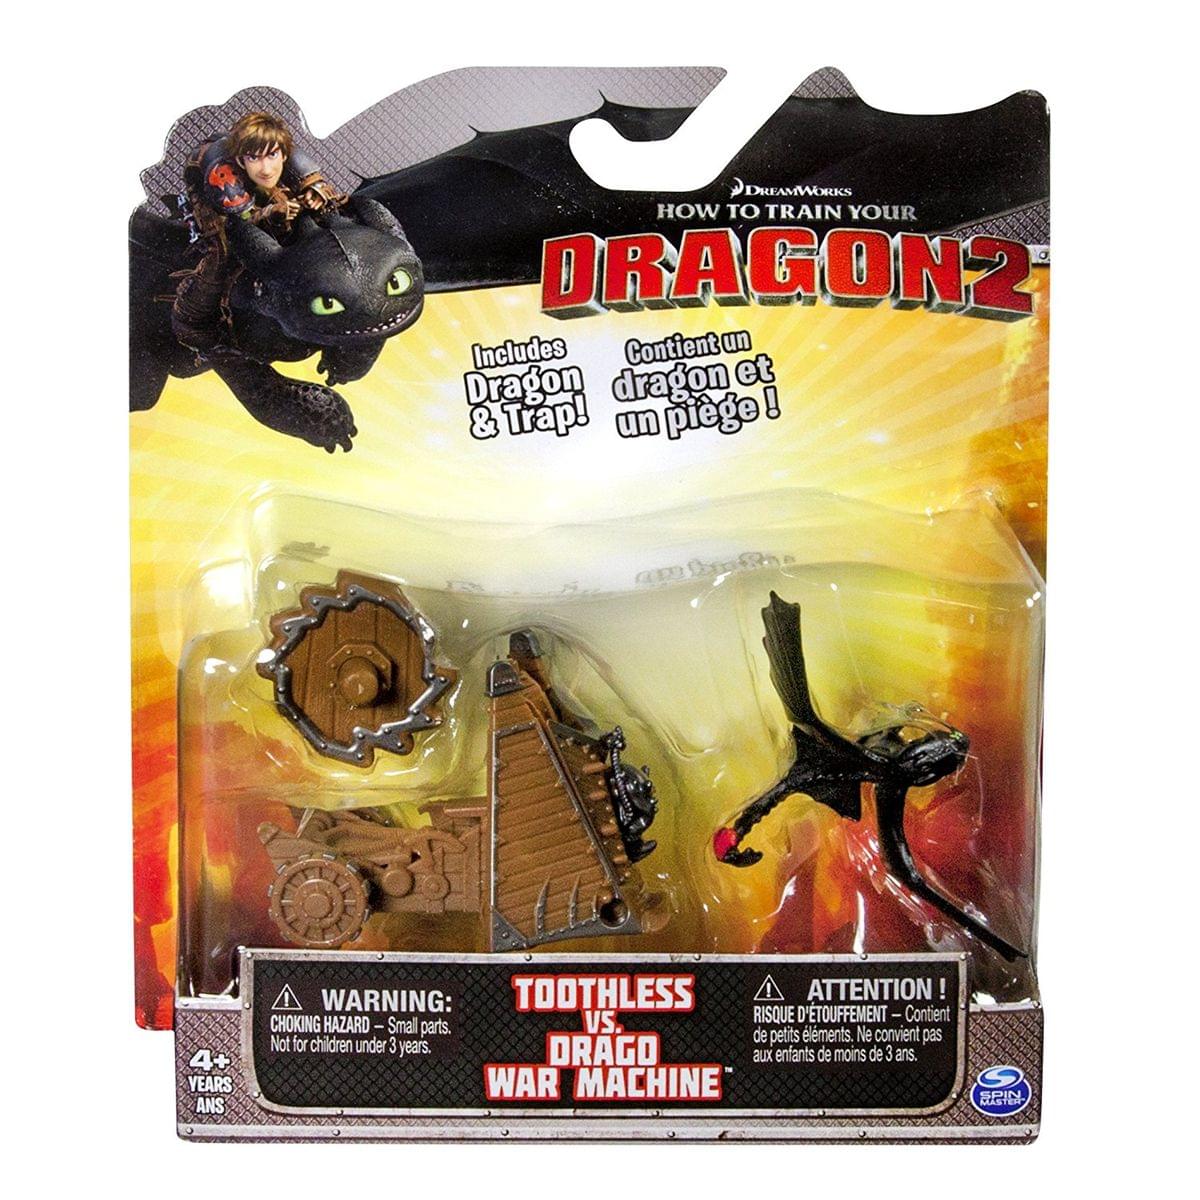 How To Train Your Dragon 2 Figure Battle Pack: Toothless vs Drago War Machine